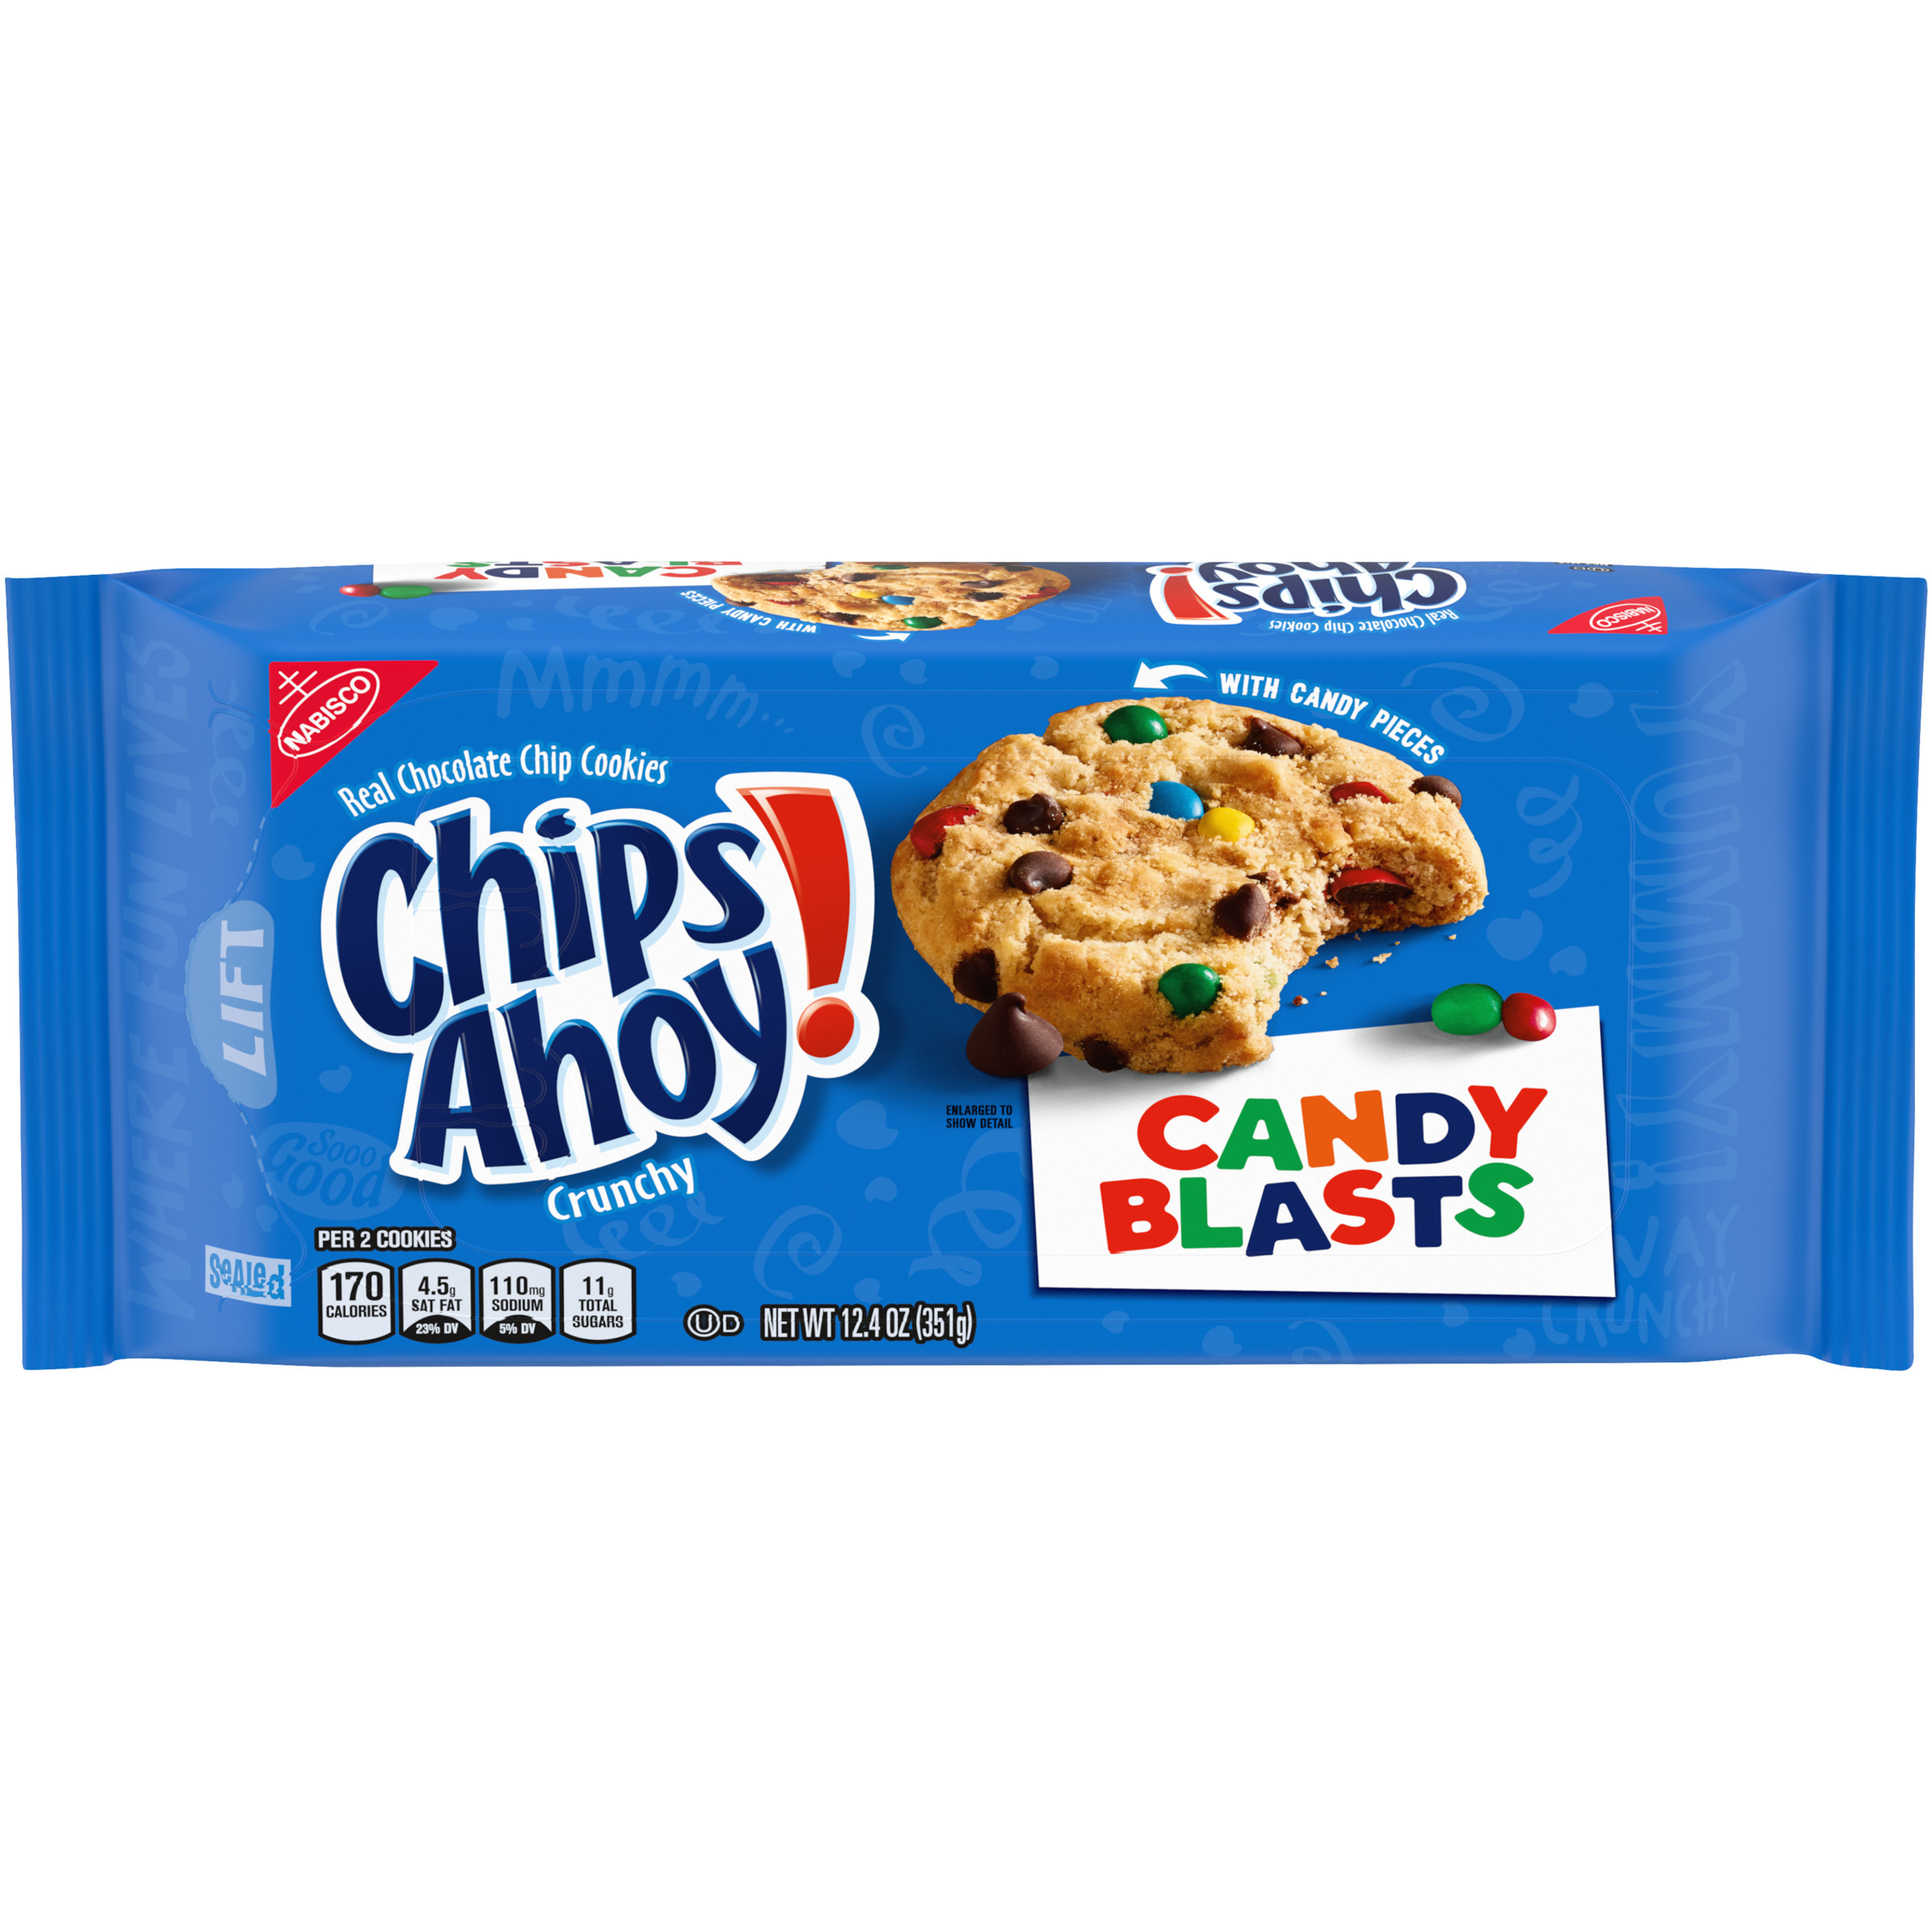 CHIPS AHOY! Candy Cookies 12.4 oz